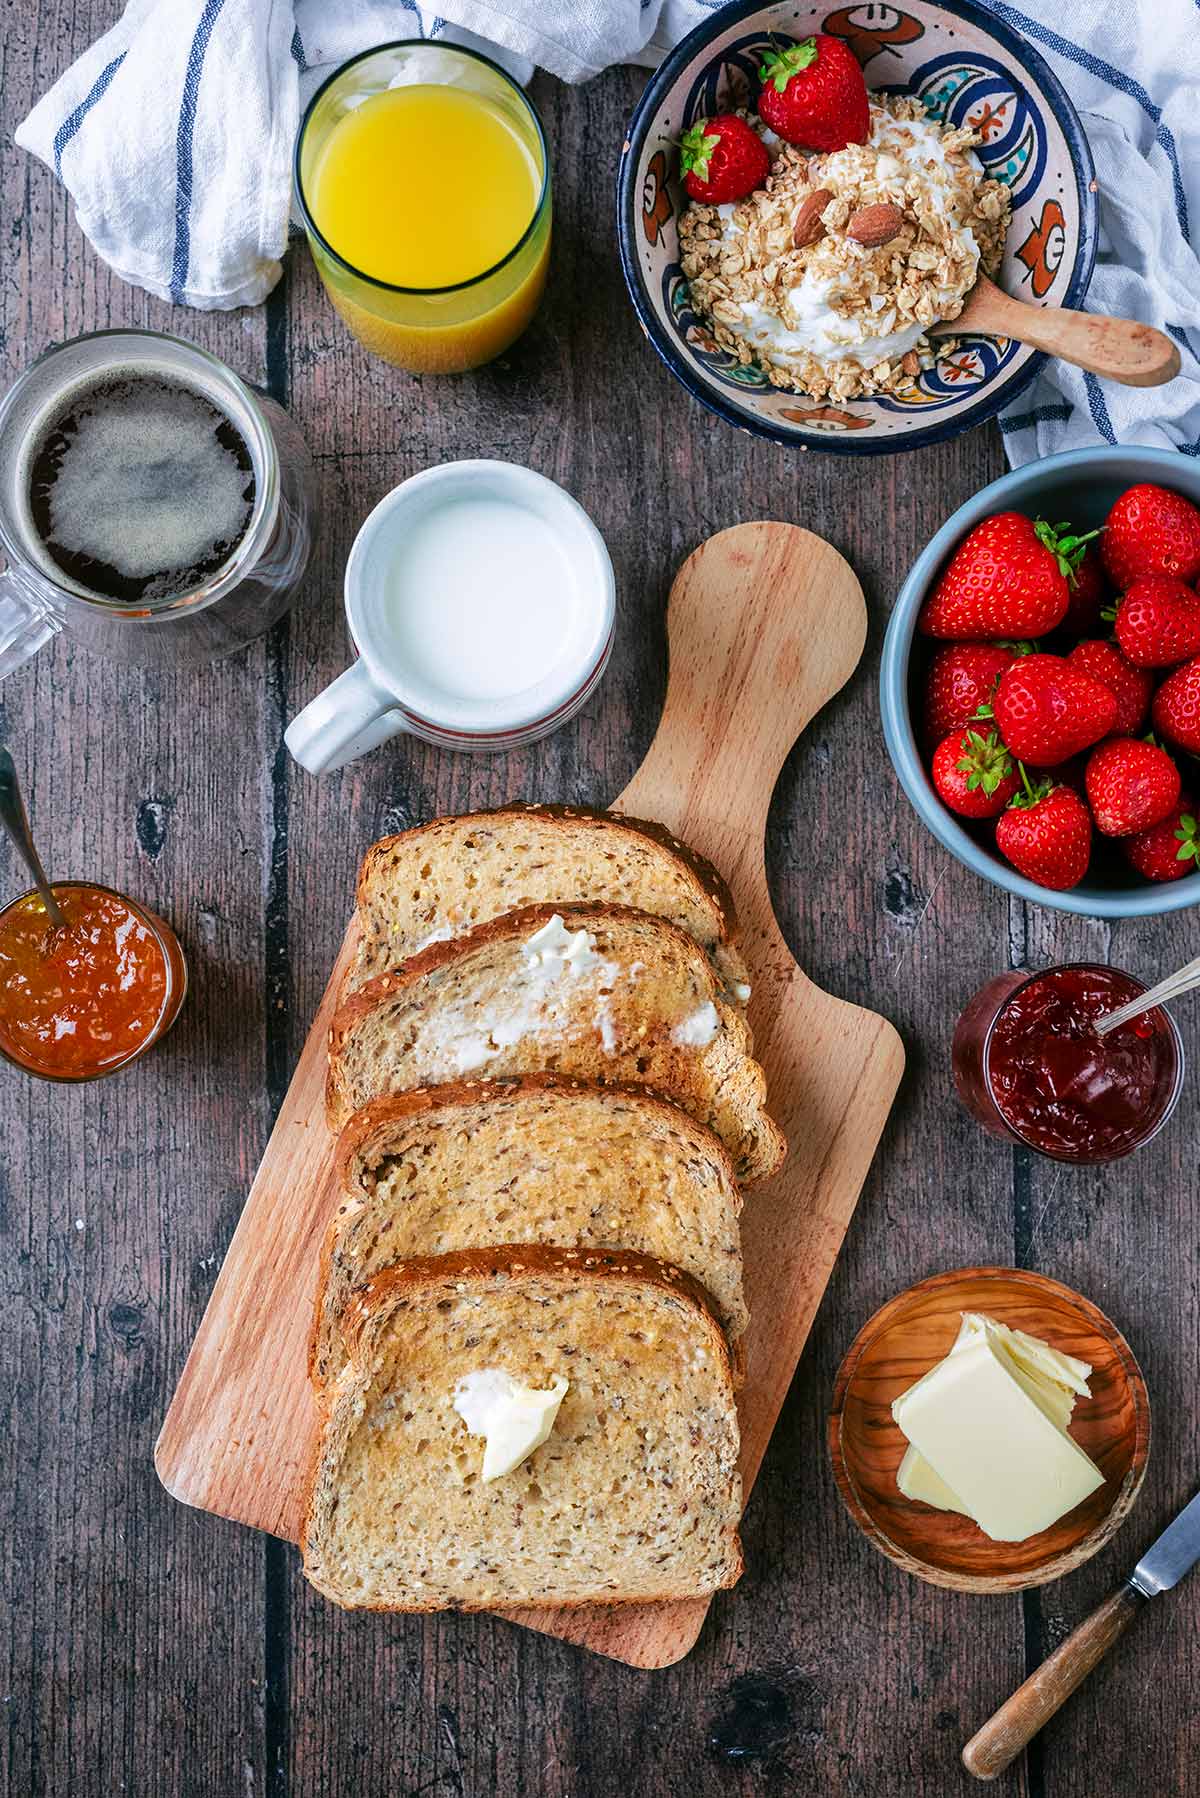 Four slices of buttered toast next to bowls of granola, berries and a cup of coffee.